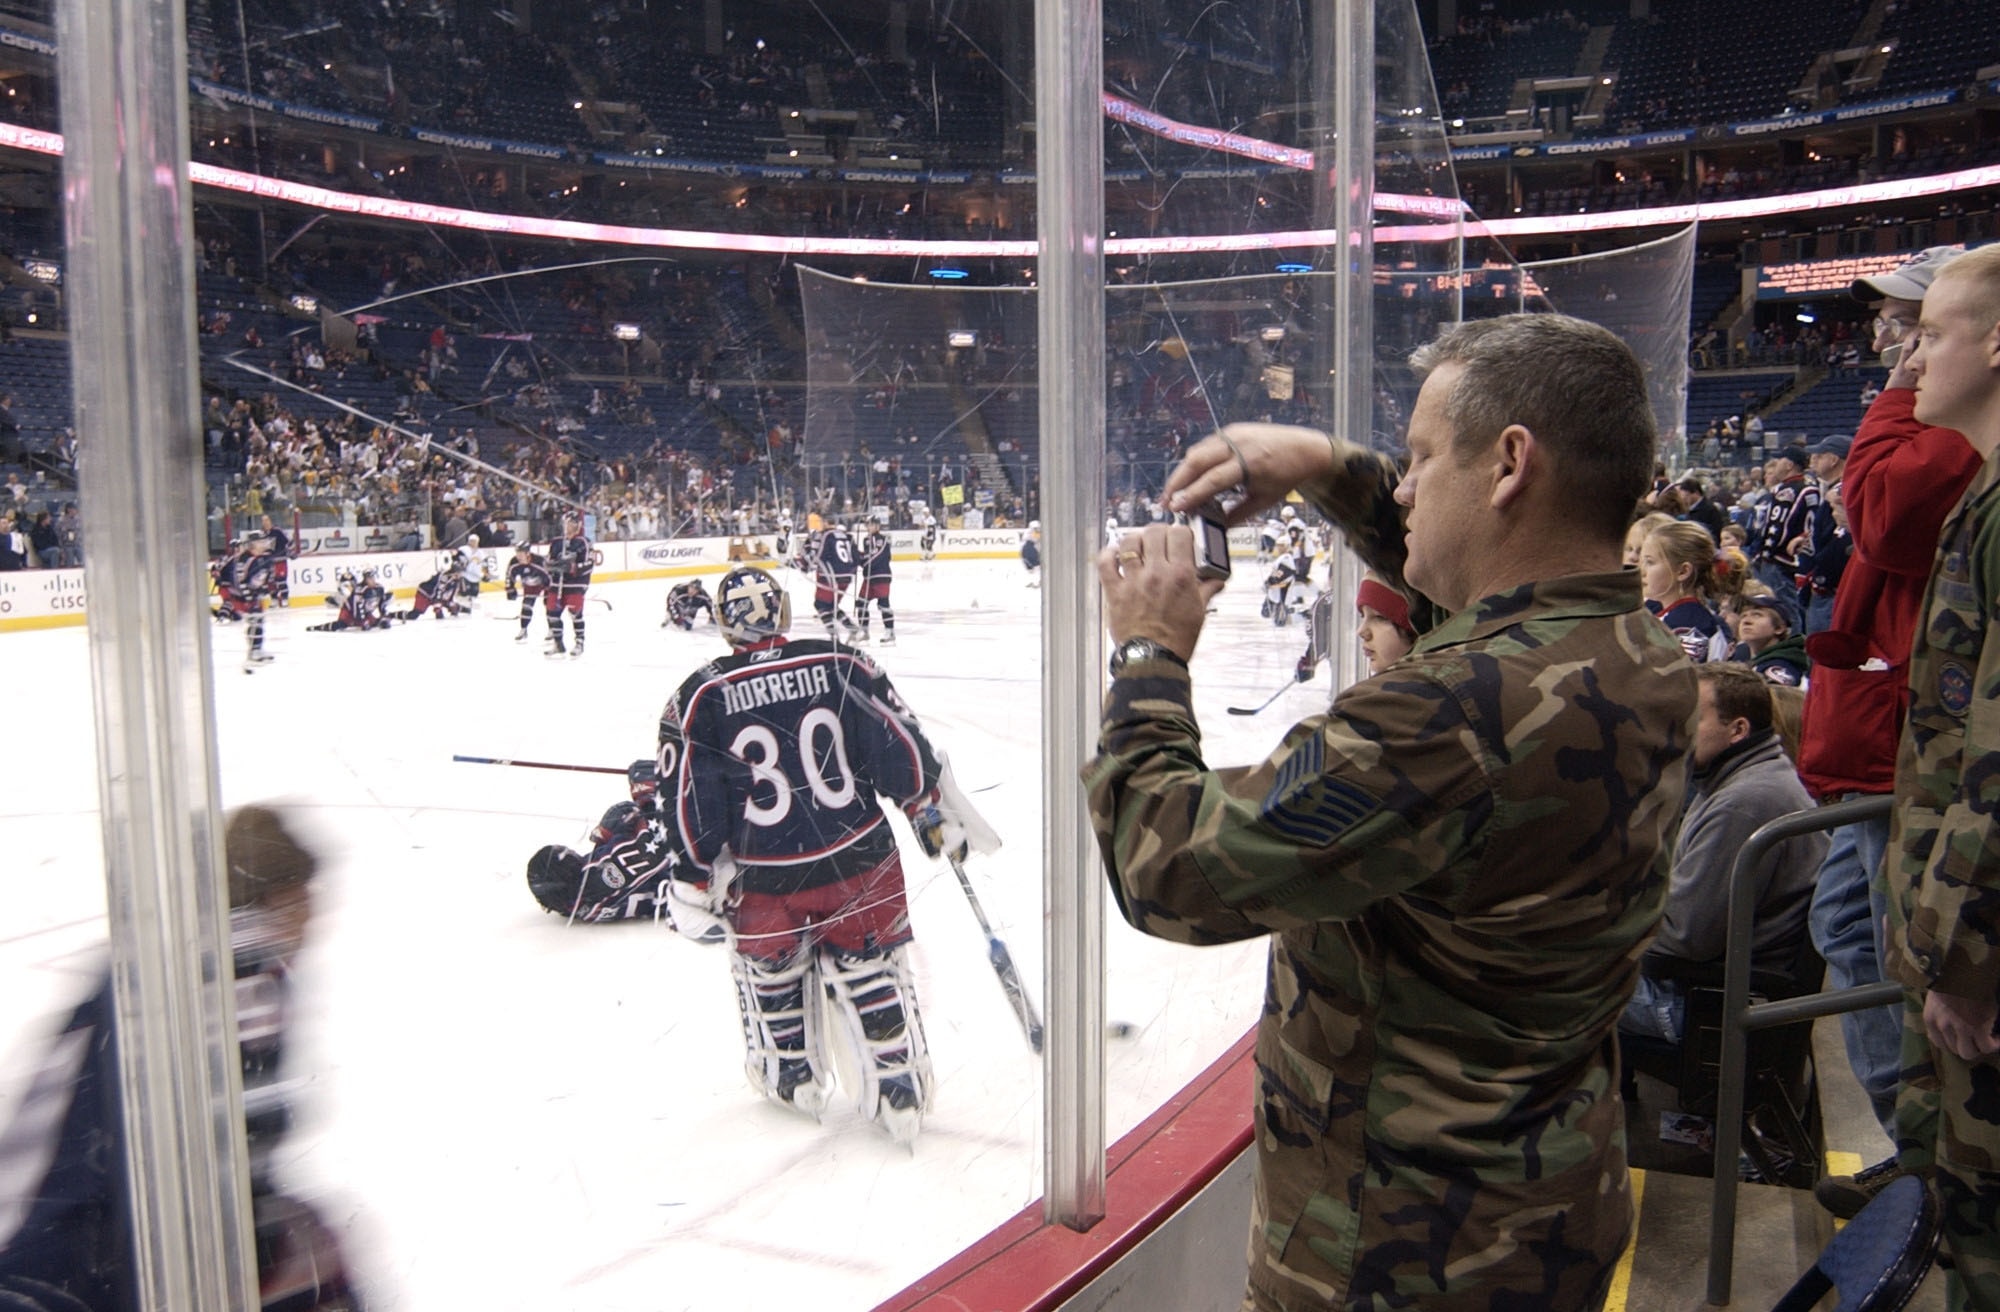 Nationwide Arena prepares to welcome Blue Jackets fans Tuesday